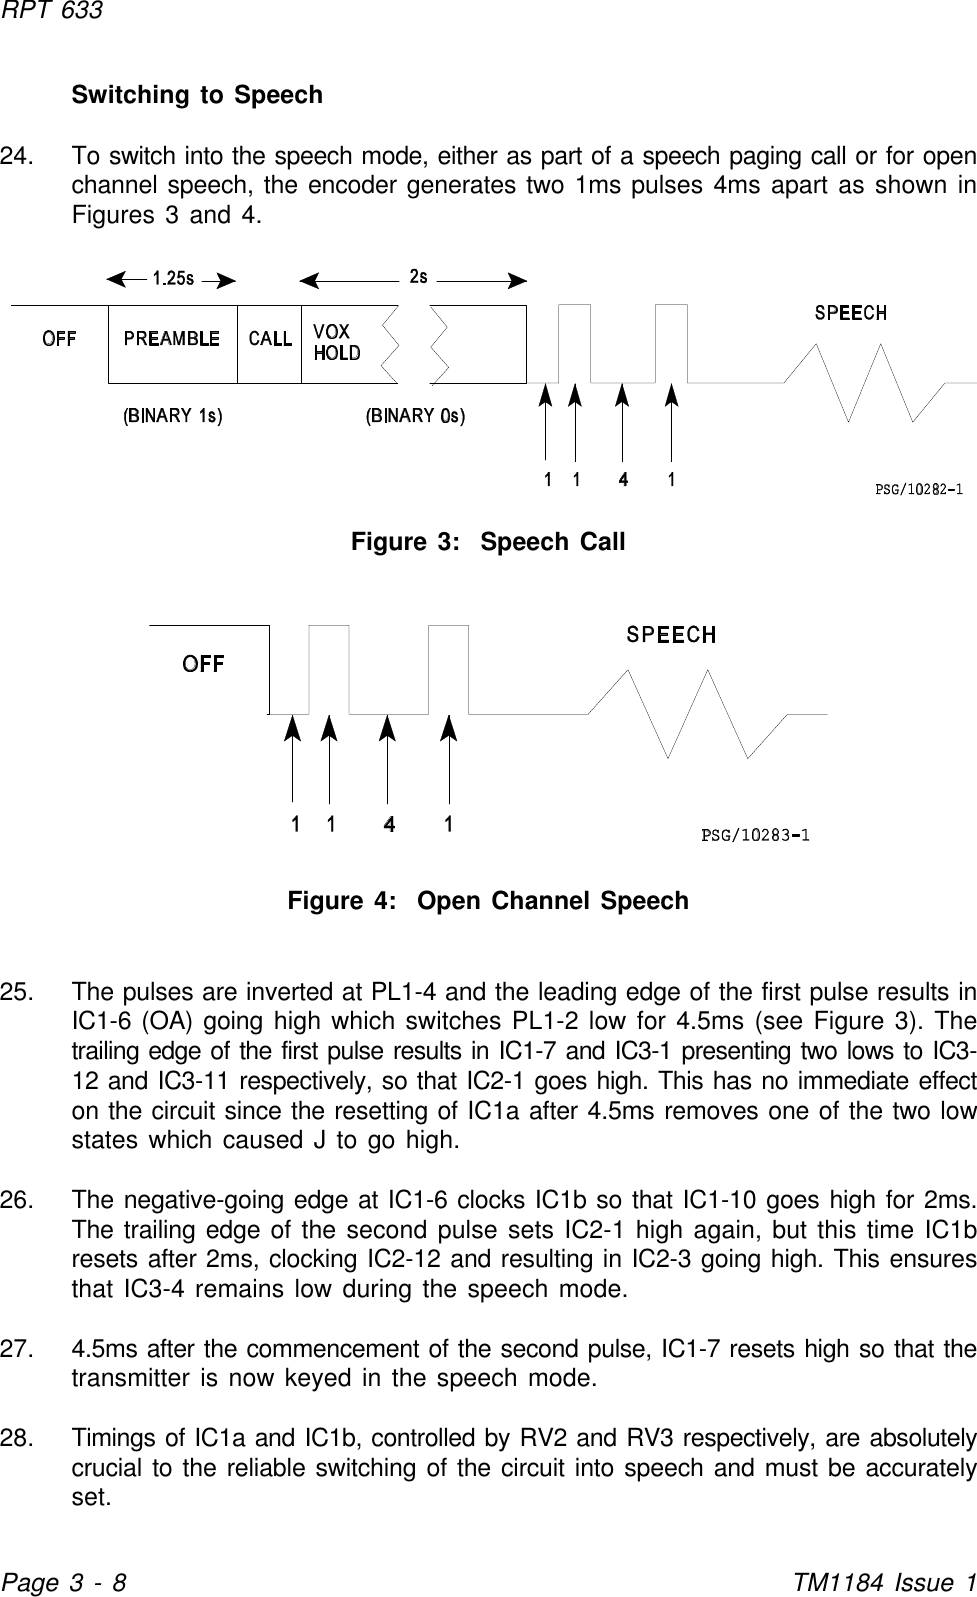 RPT 633Page 3 - 8TM1184 Issue 1Switching to Speech24. To switch into the speech mode, either as part of a speech paging call or for openchannel speech, the encoder generates two 1ms pulses 4ms apart as shown inFigures 3 and 4.Figure 3:  Speech CallFigure 4:  Open Channel Speech25. The pulses are inverted at PL1-4 and the leading edge of the first pulse results inIC1-6 (OA) going high which switches PL1-2 low for 4.5ms (see Figure 3). Thetrailing edge of the first pulse results in IC1-7 and IC3-1 presenting two lows to IC3-12 and IC3-11 respectively, so that IC2-1 goes high. This has no immediate effecton the circuit since the resetting of IC1a after 4.5ms removes one of the two lowstates which caused J to go high.26. The negative-going edge at IC1-6 clocks IC1b so that IC1-10 goes high for 2ms.The trailing edge of the second pulse sets IC2-1 high again, but this time IC1bresets after 2ms, clocking IC2-12 and resulting in IC2-3 going high. This ensuresthat IC3-4 remains low during the speech mode.27. 4.5ms after the commencement of the second pulse, IC1-7 resets high so that thetransmitter is now keyed in the speech mode.28. Timings of IC1a and IC1b, controlled by RV2 and RV3 respectively, are absolutelycrucial to the reliable switching of the circuit into speech and must be accuratelyset.